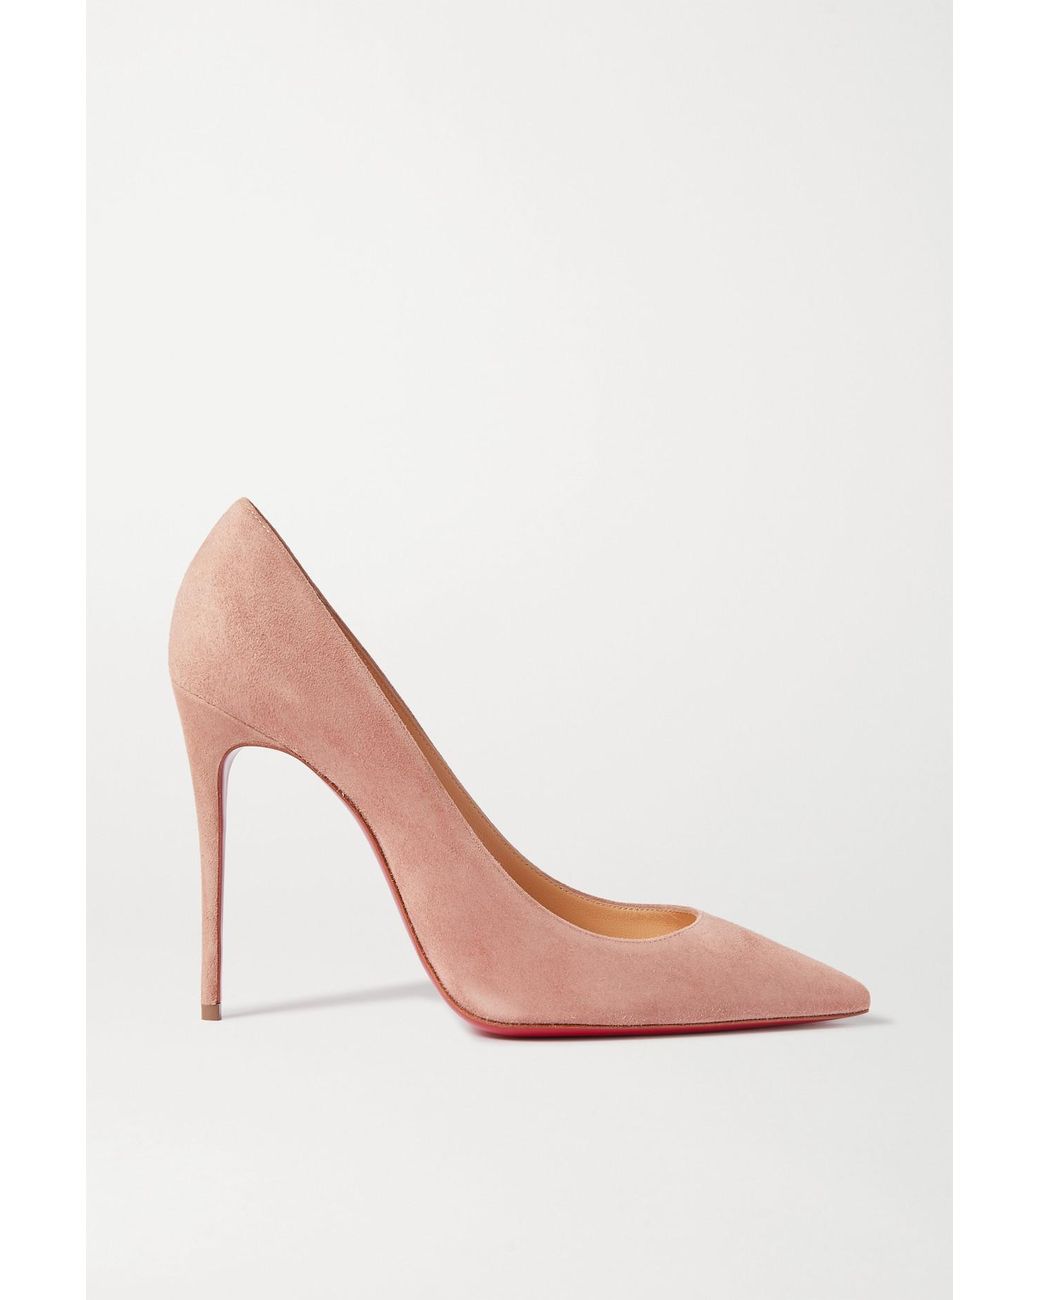 Christian Louboutin Kate 100 Suede Pumps